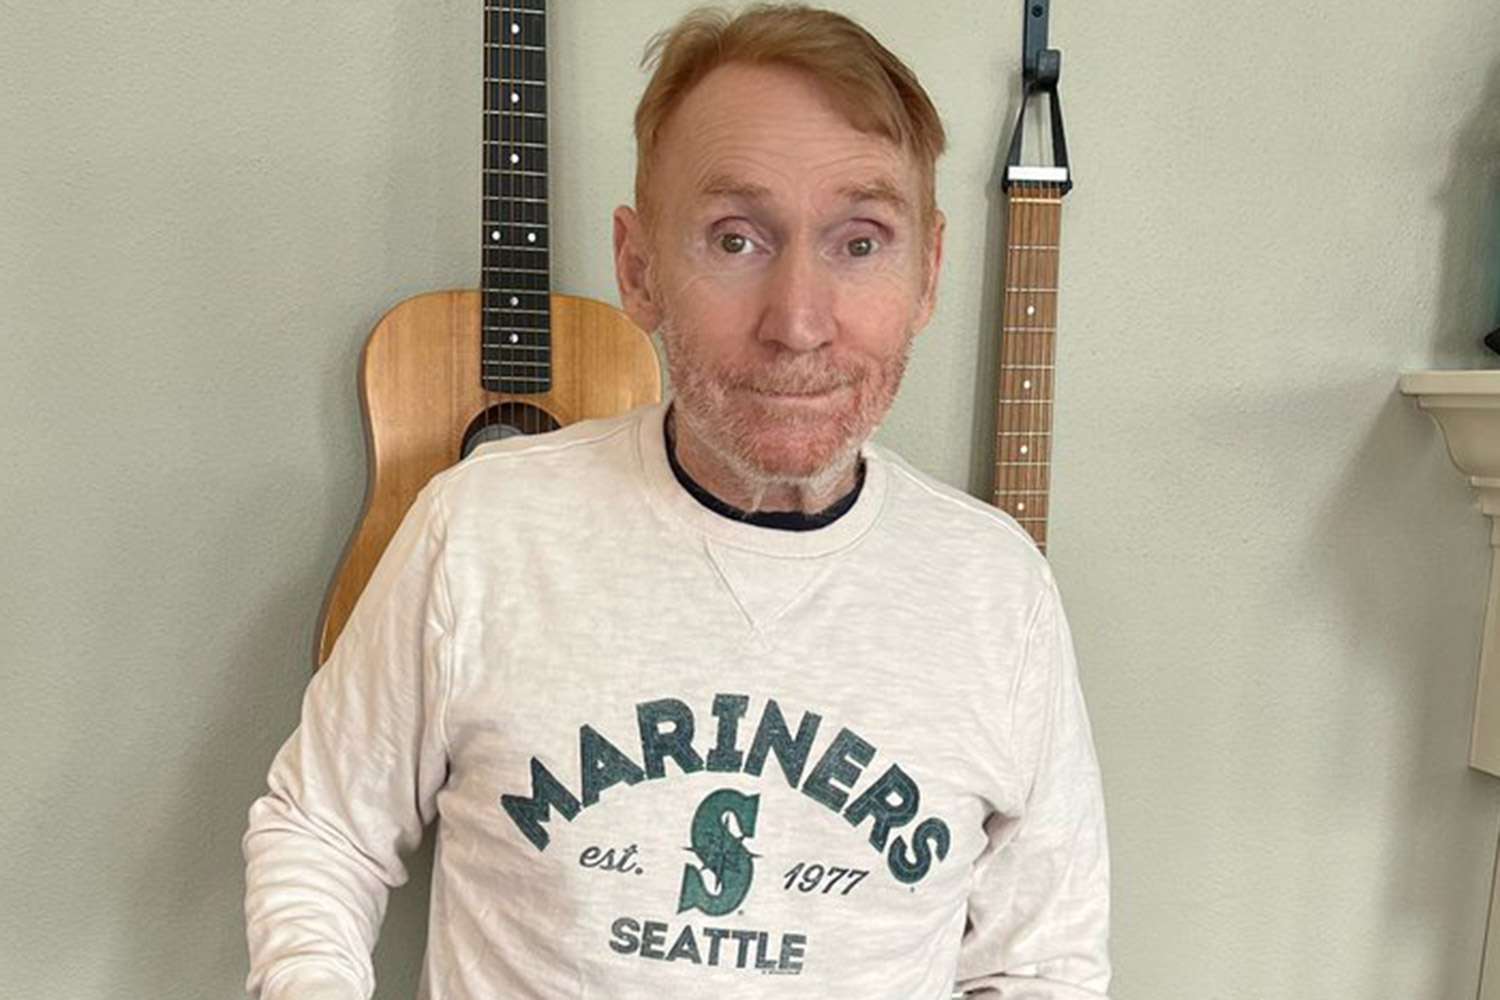 https://twitter.com/TheDoochMan/status/1520100277705076736?s=20&t=Cxrj916W_LLLkIYRTjOMcA — Danny Bonaduce Takes Medical Leave from Radio Show as He Seeks Diagnosis for Mystery Illness